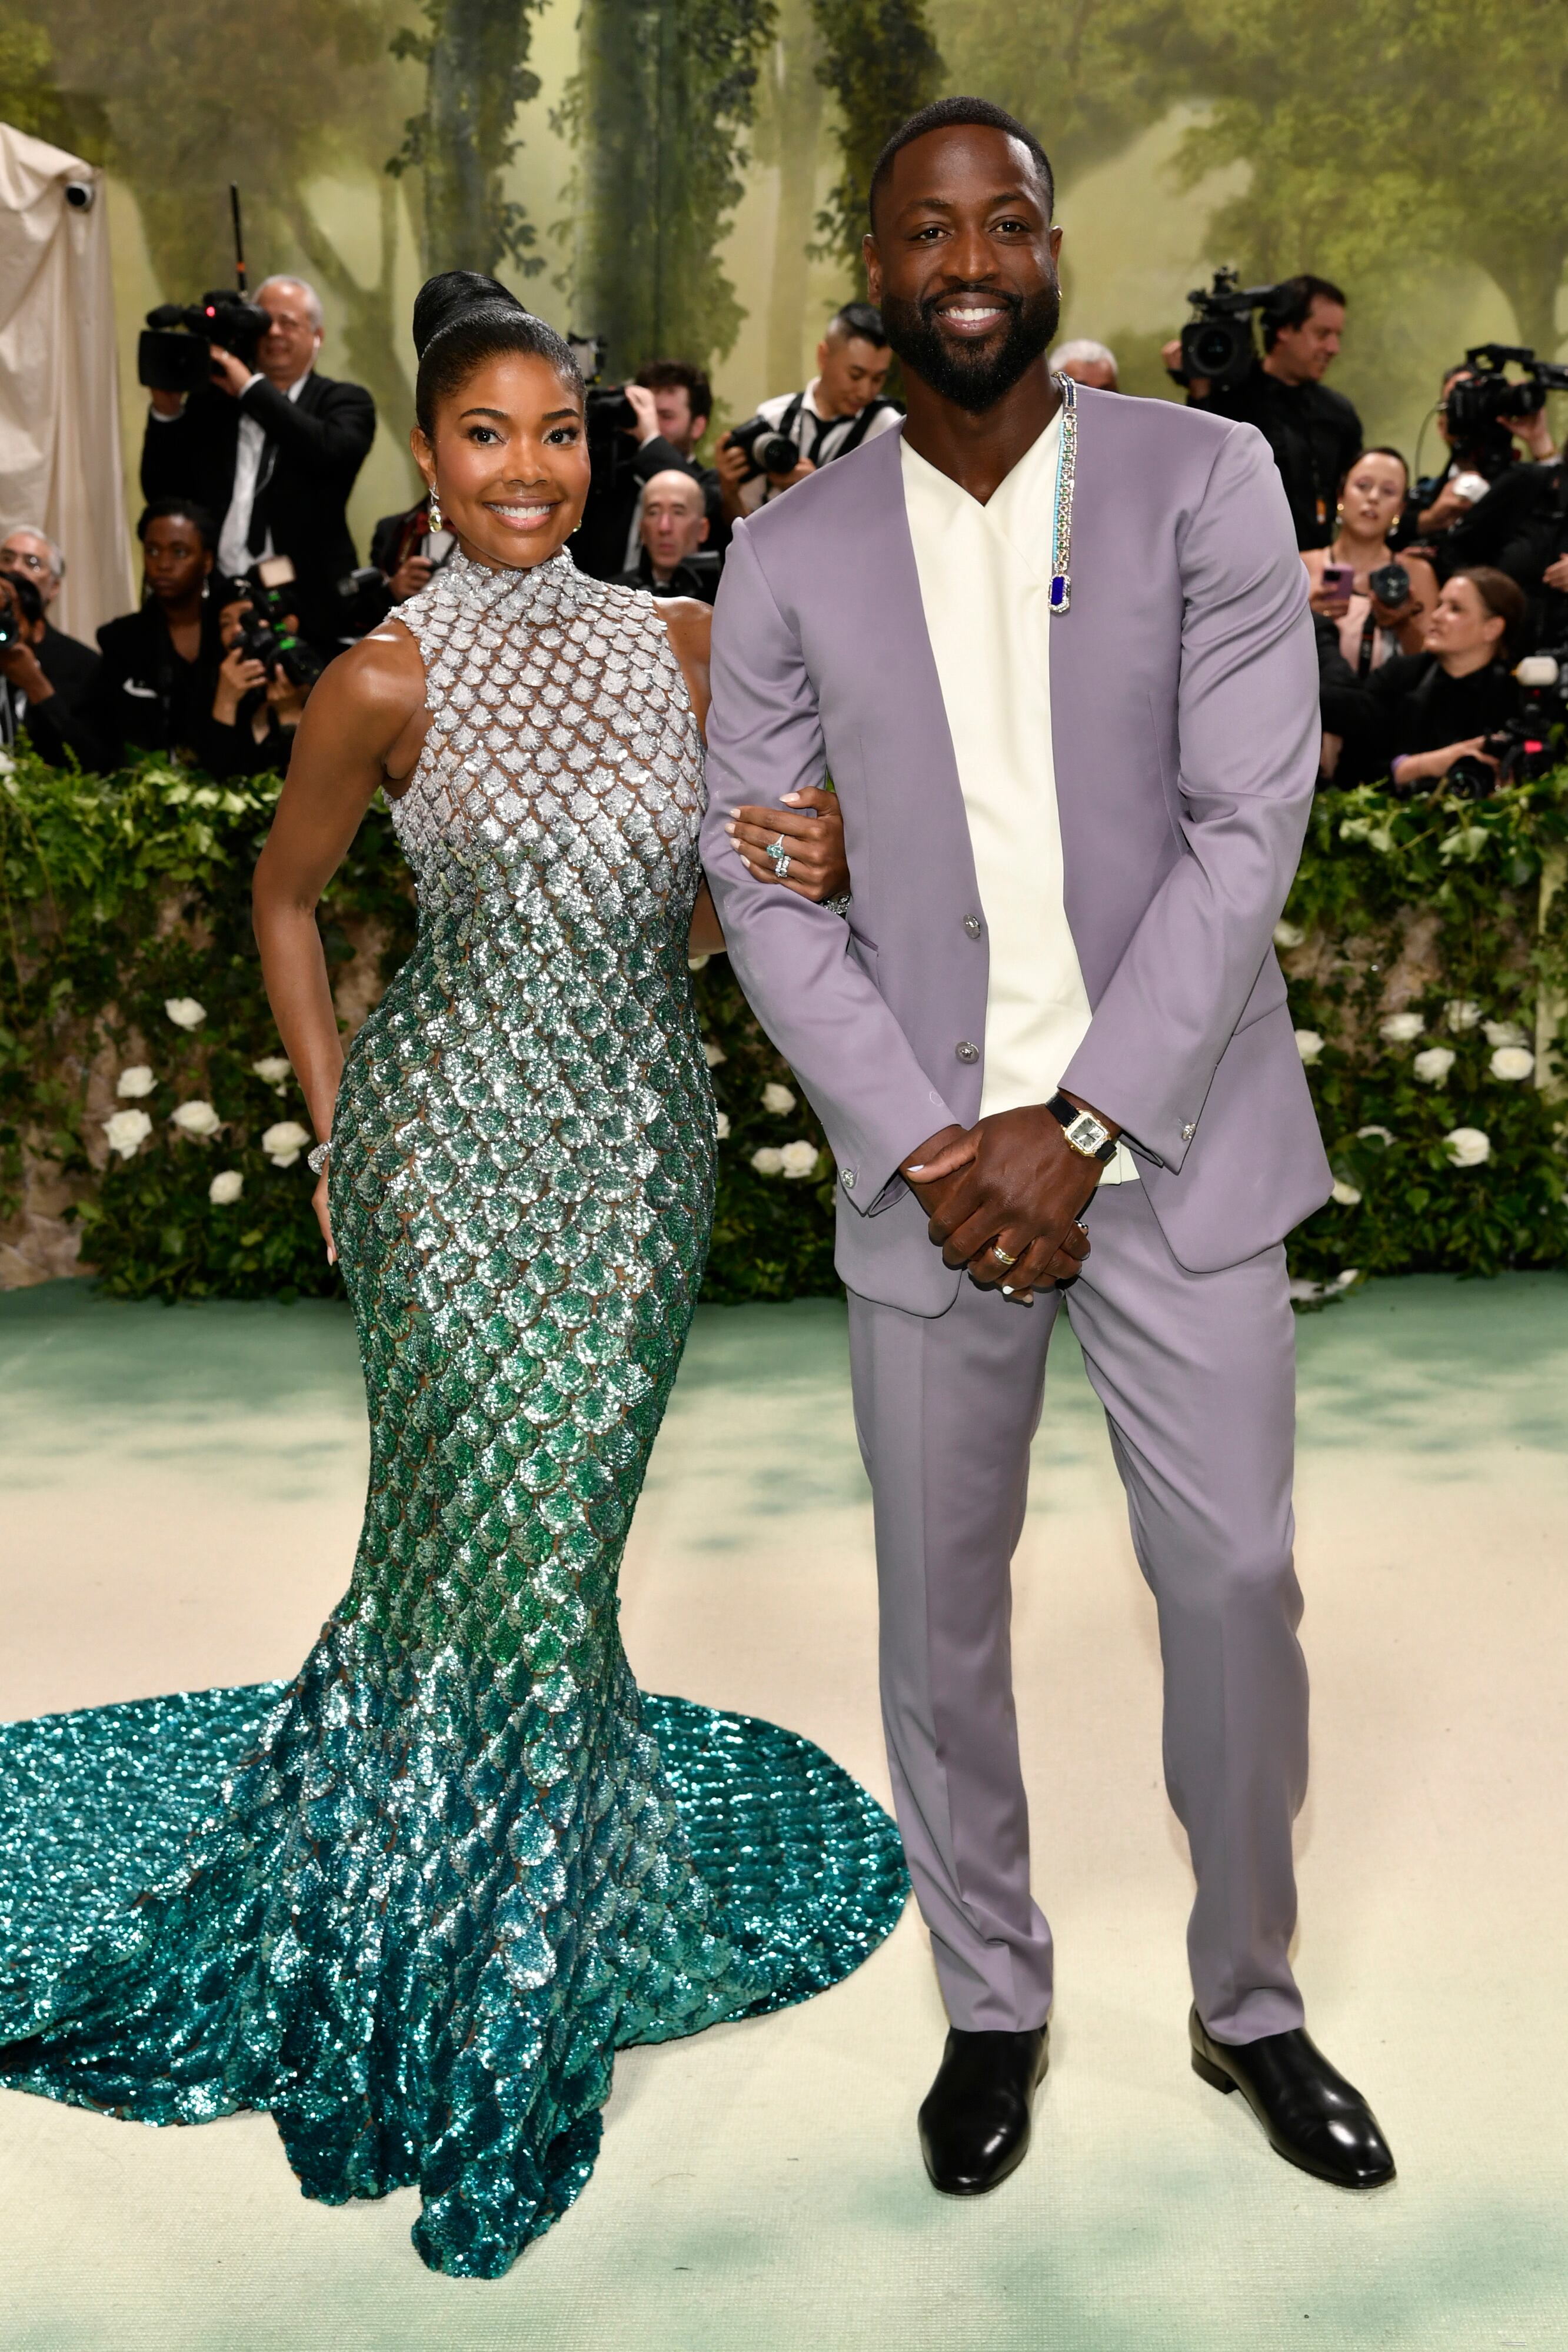 Gabrielle Union, left, and Dwyane Wade attend The Metropolitan Museum of Art's Costume Institute benefit gala celebrating the opening of the 